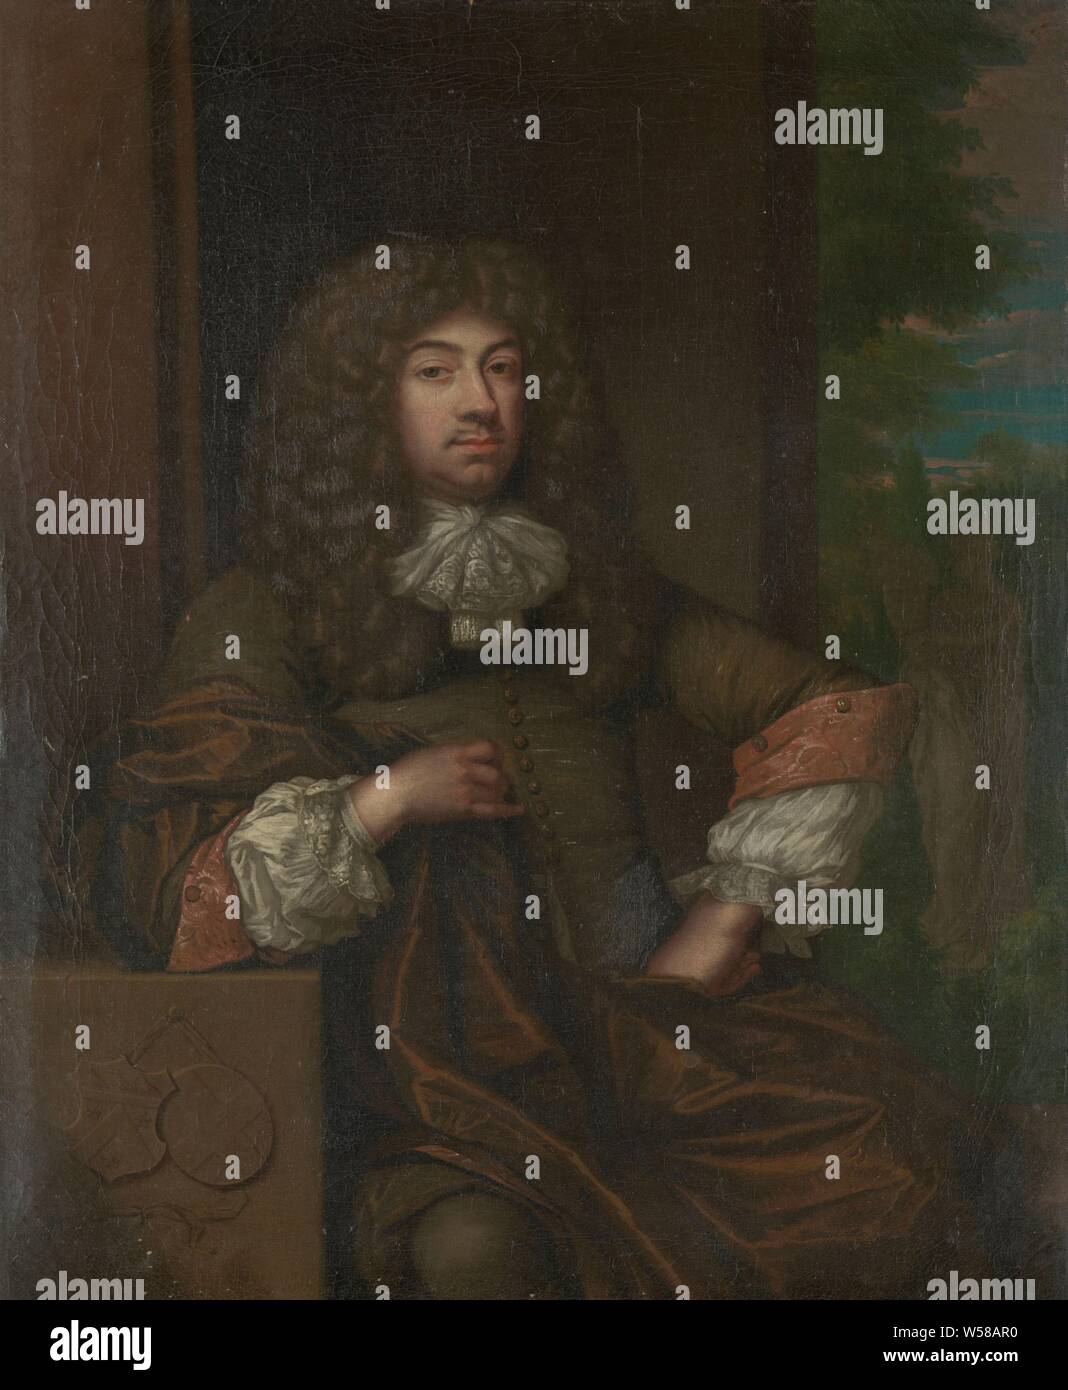 Portrait of Jan Boudaen Courten (1635-1716), Lord of St. Laurens, Schellach and Popkensburg, Judge and Alderman of Middelburg, Portrait of Jan Boudaen Courten, Lord of St Laurens, Schellach and Popkensburg. Council of Middelburg and governor of the VOC. Knee-piece, sitting, on the right a garden with an image of a woman with a hearing of plenty. Copy by Philip van Dijk to the original by Caspar Netscher. Johan Boudaen Courten, Caspar Netscher (copy after), 1690 - 1753, canvas, oil paint (paint), h 49 cm × w 40 cm d 6 cm Stock Photo